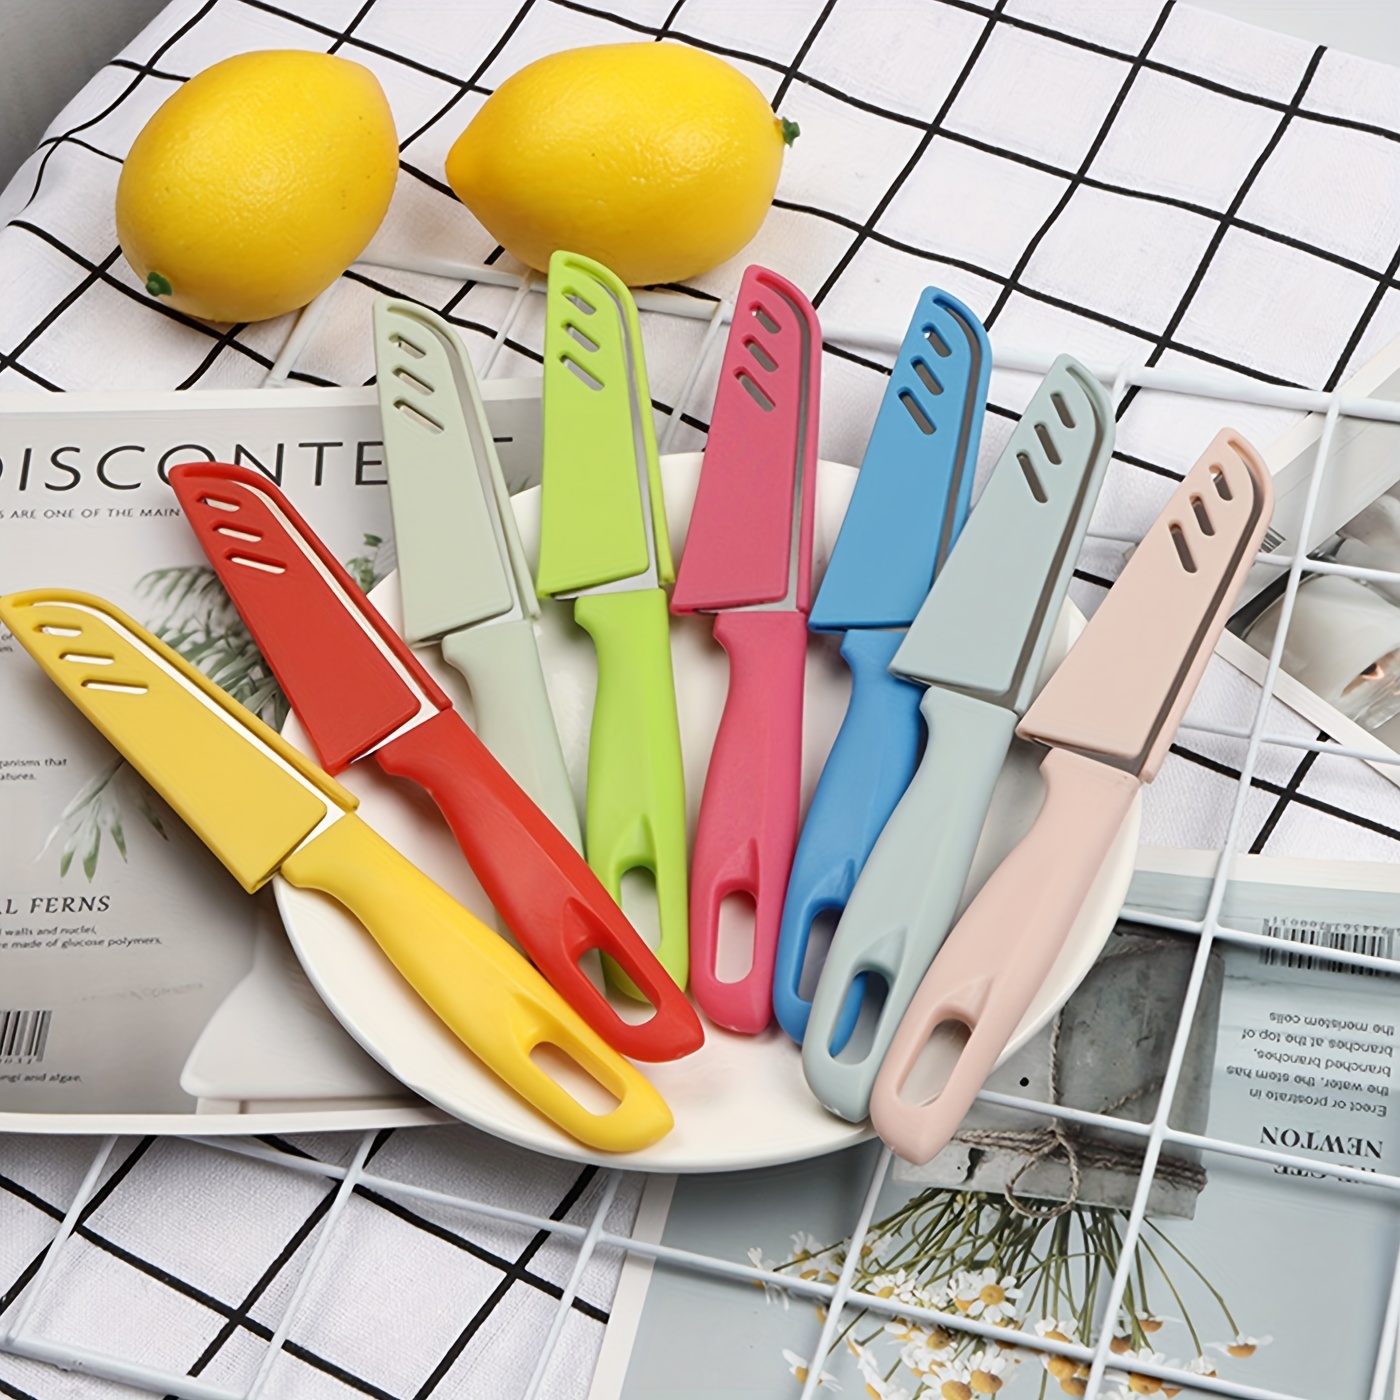 8 Kitchen Knife Stainless Steel Fruit Knife With Safety Cover In Random  Color